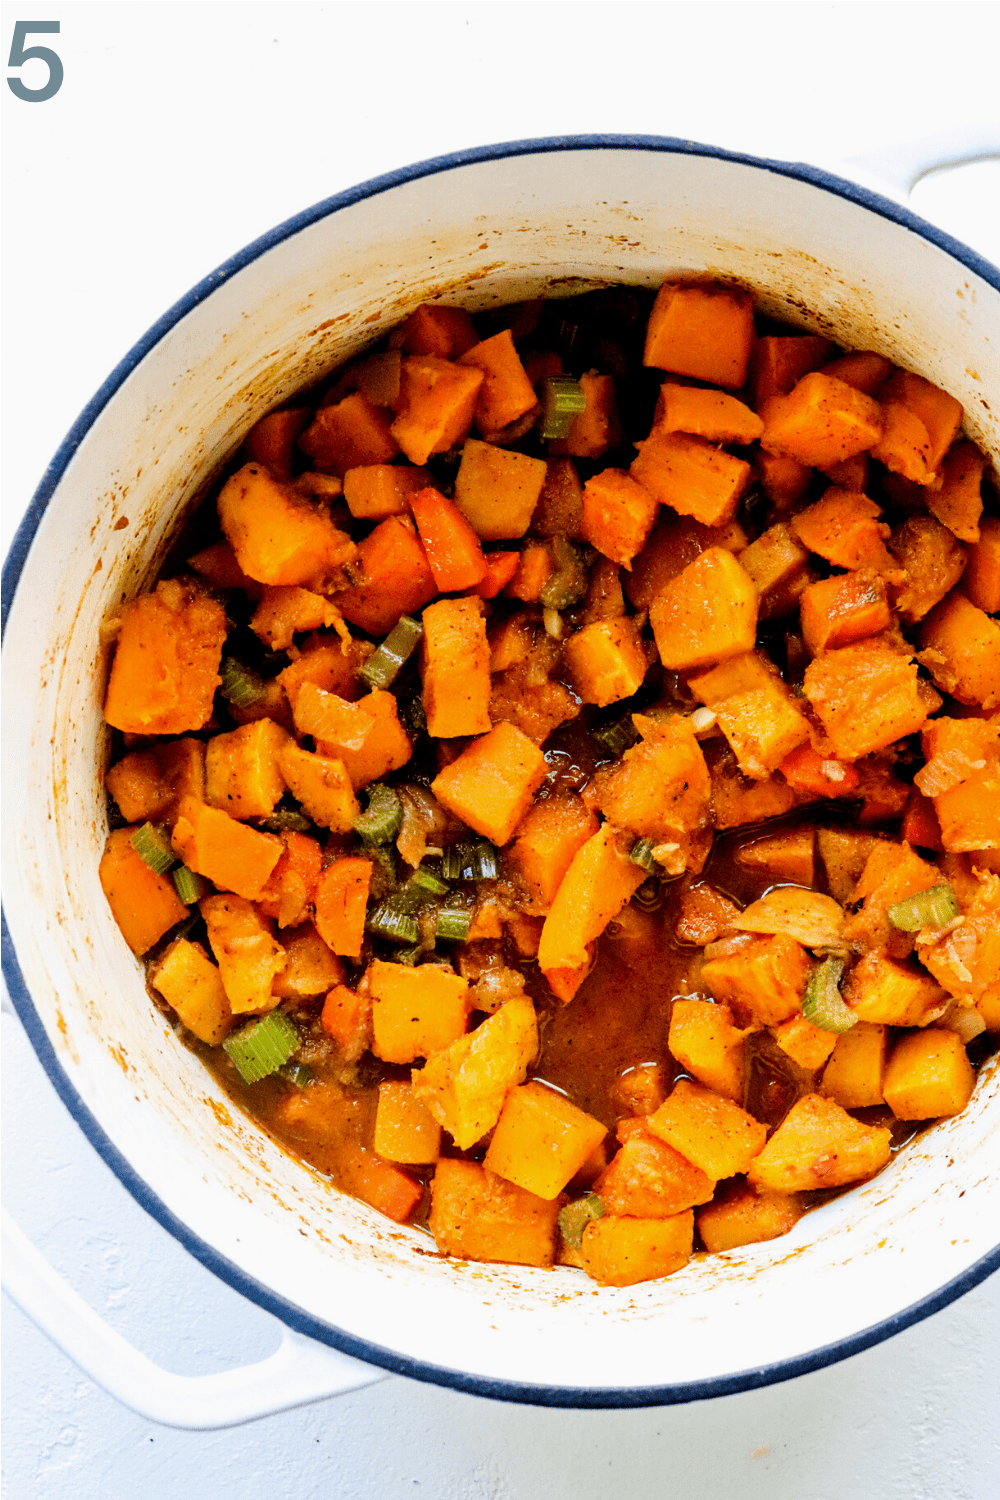 Cooked potato and squash mixed with veggies in a white pot